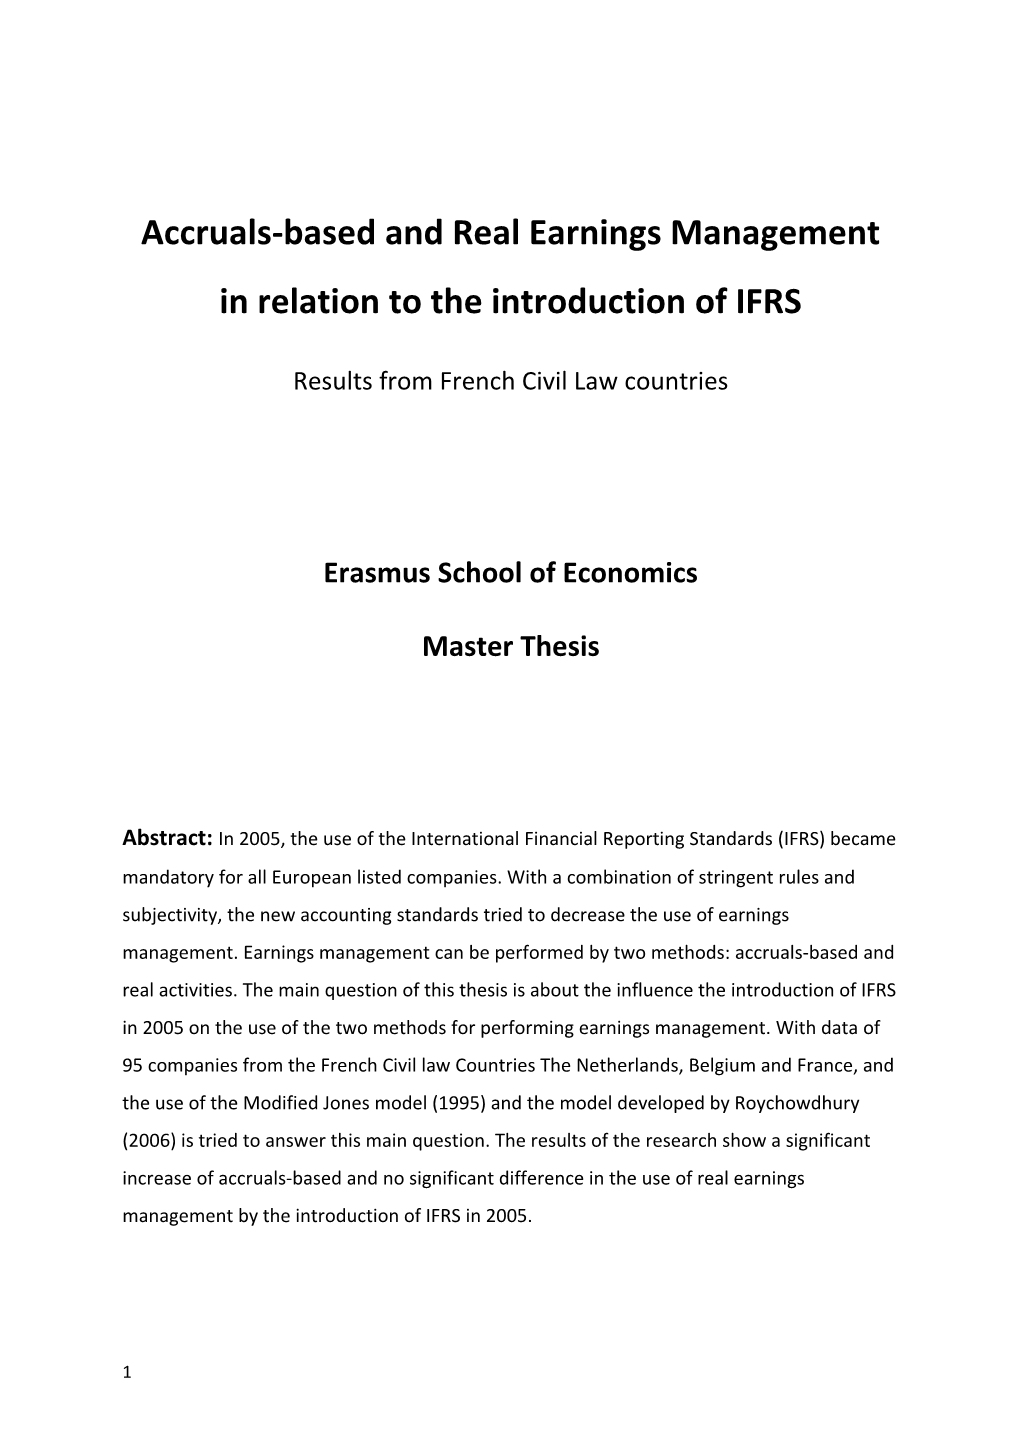 Accruals-Based and Real Earnings Managementin Relation to the Introduction of IFRS